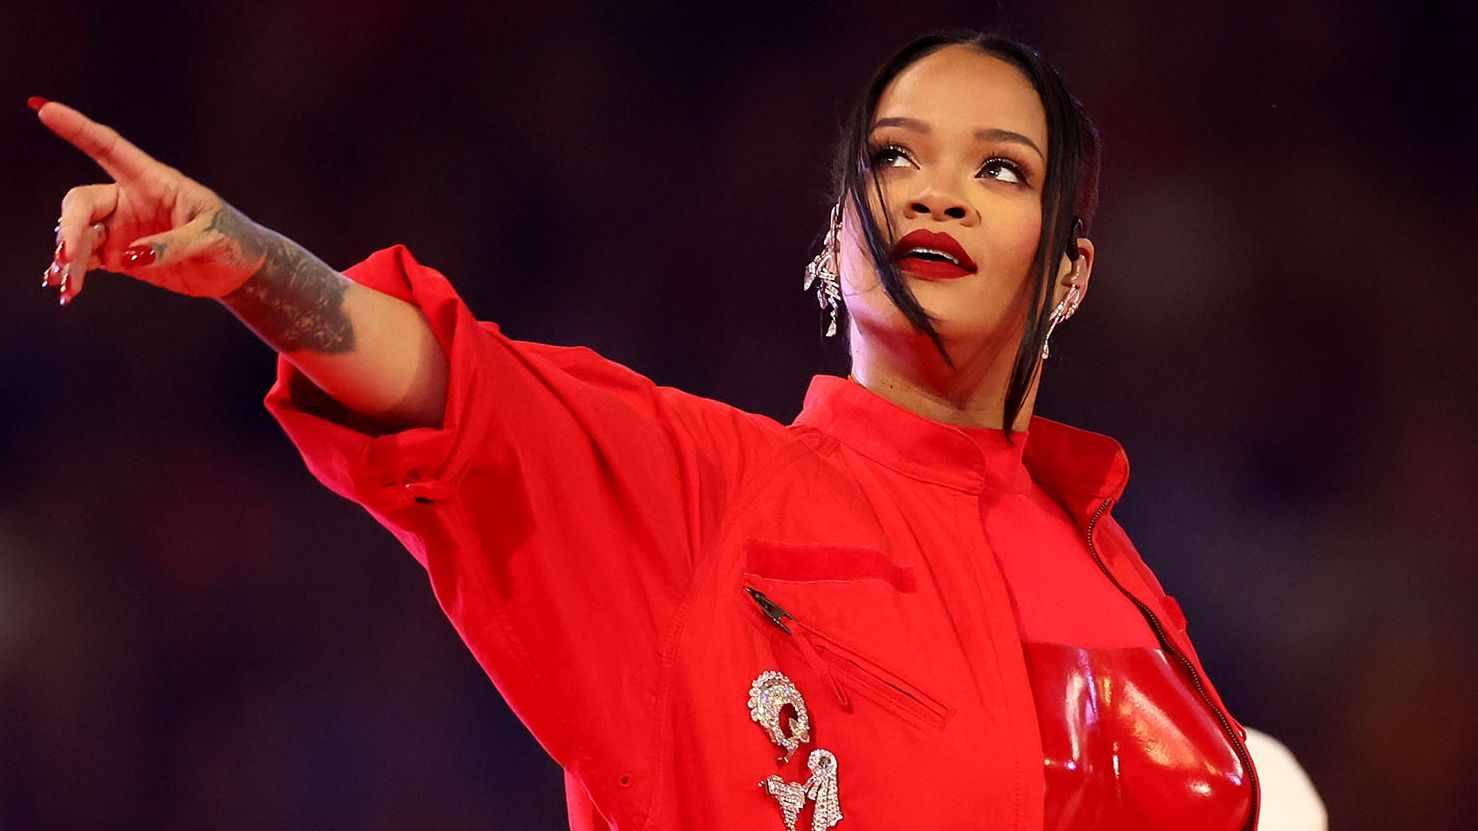 Rihanna's new music: When will her album 'R9' be released?